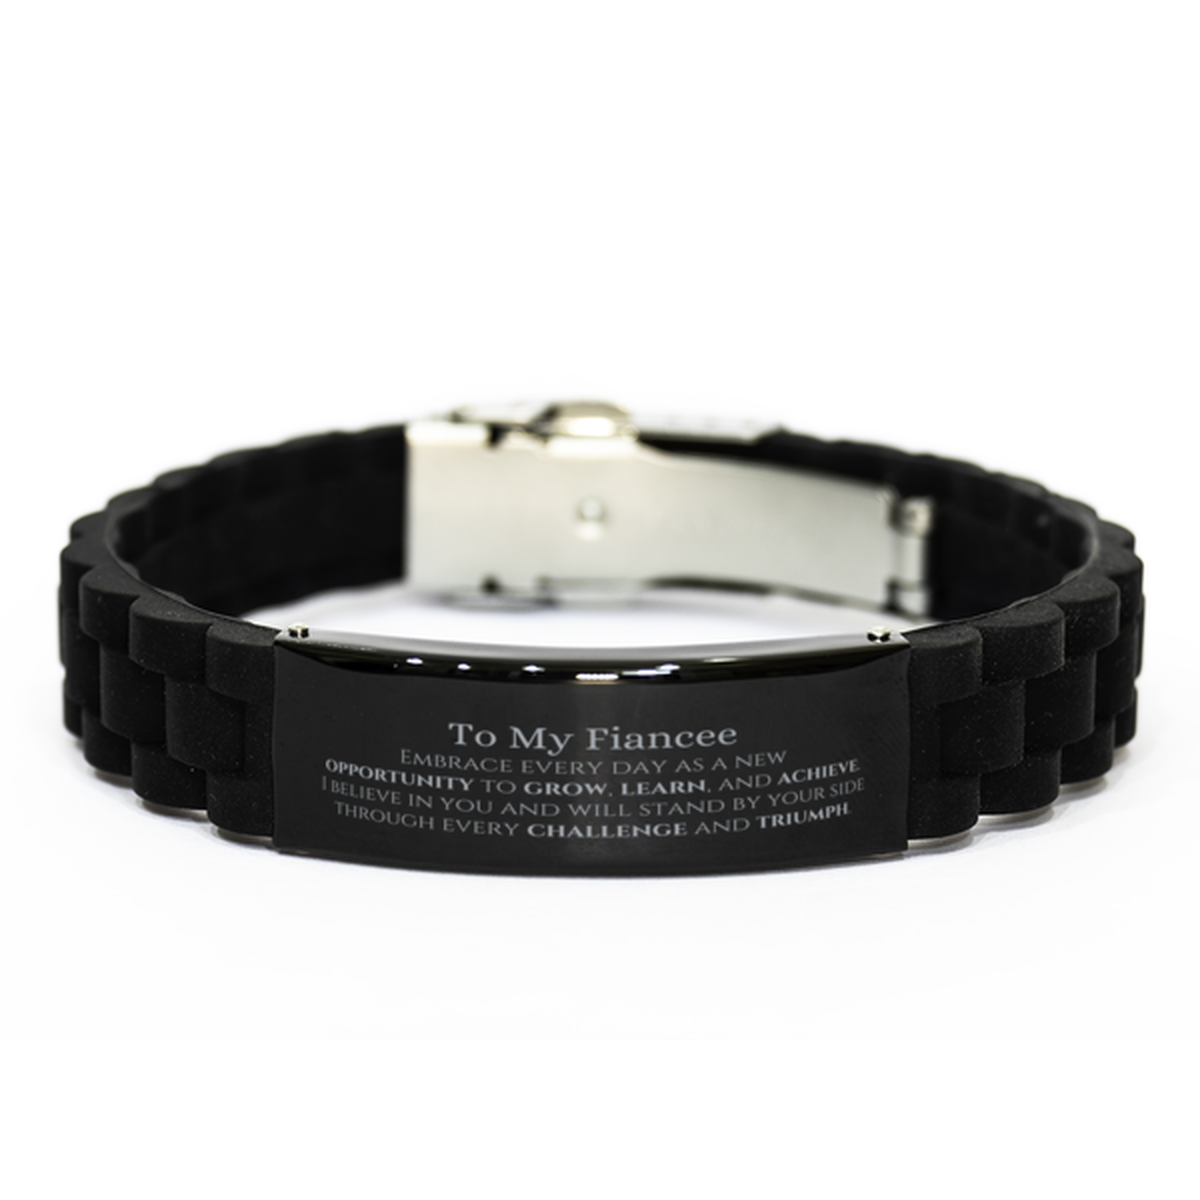 To My Fiancee Gifts, I believe in you and will stand by your side, Inspirational Black Glidelock Clasp Bracelet For Fiancee, Birthday Christmas Motivational Fiancee Gifts